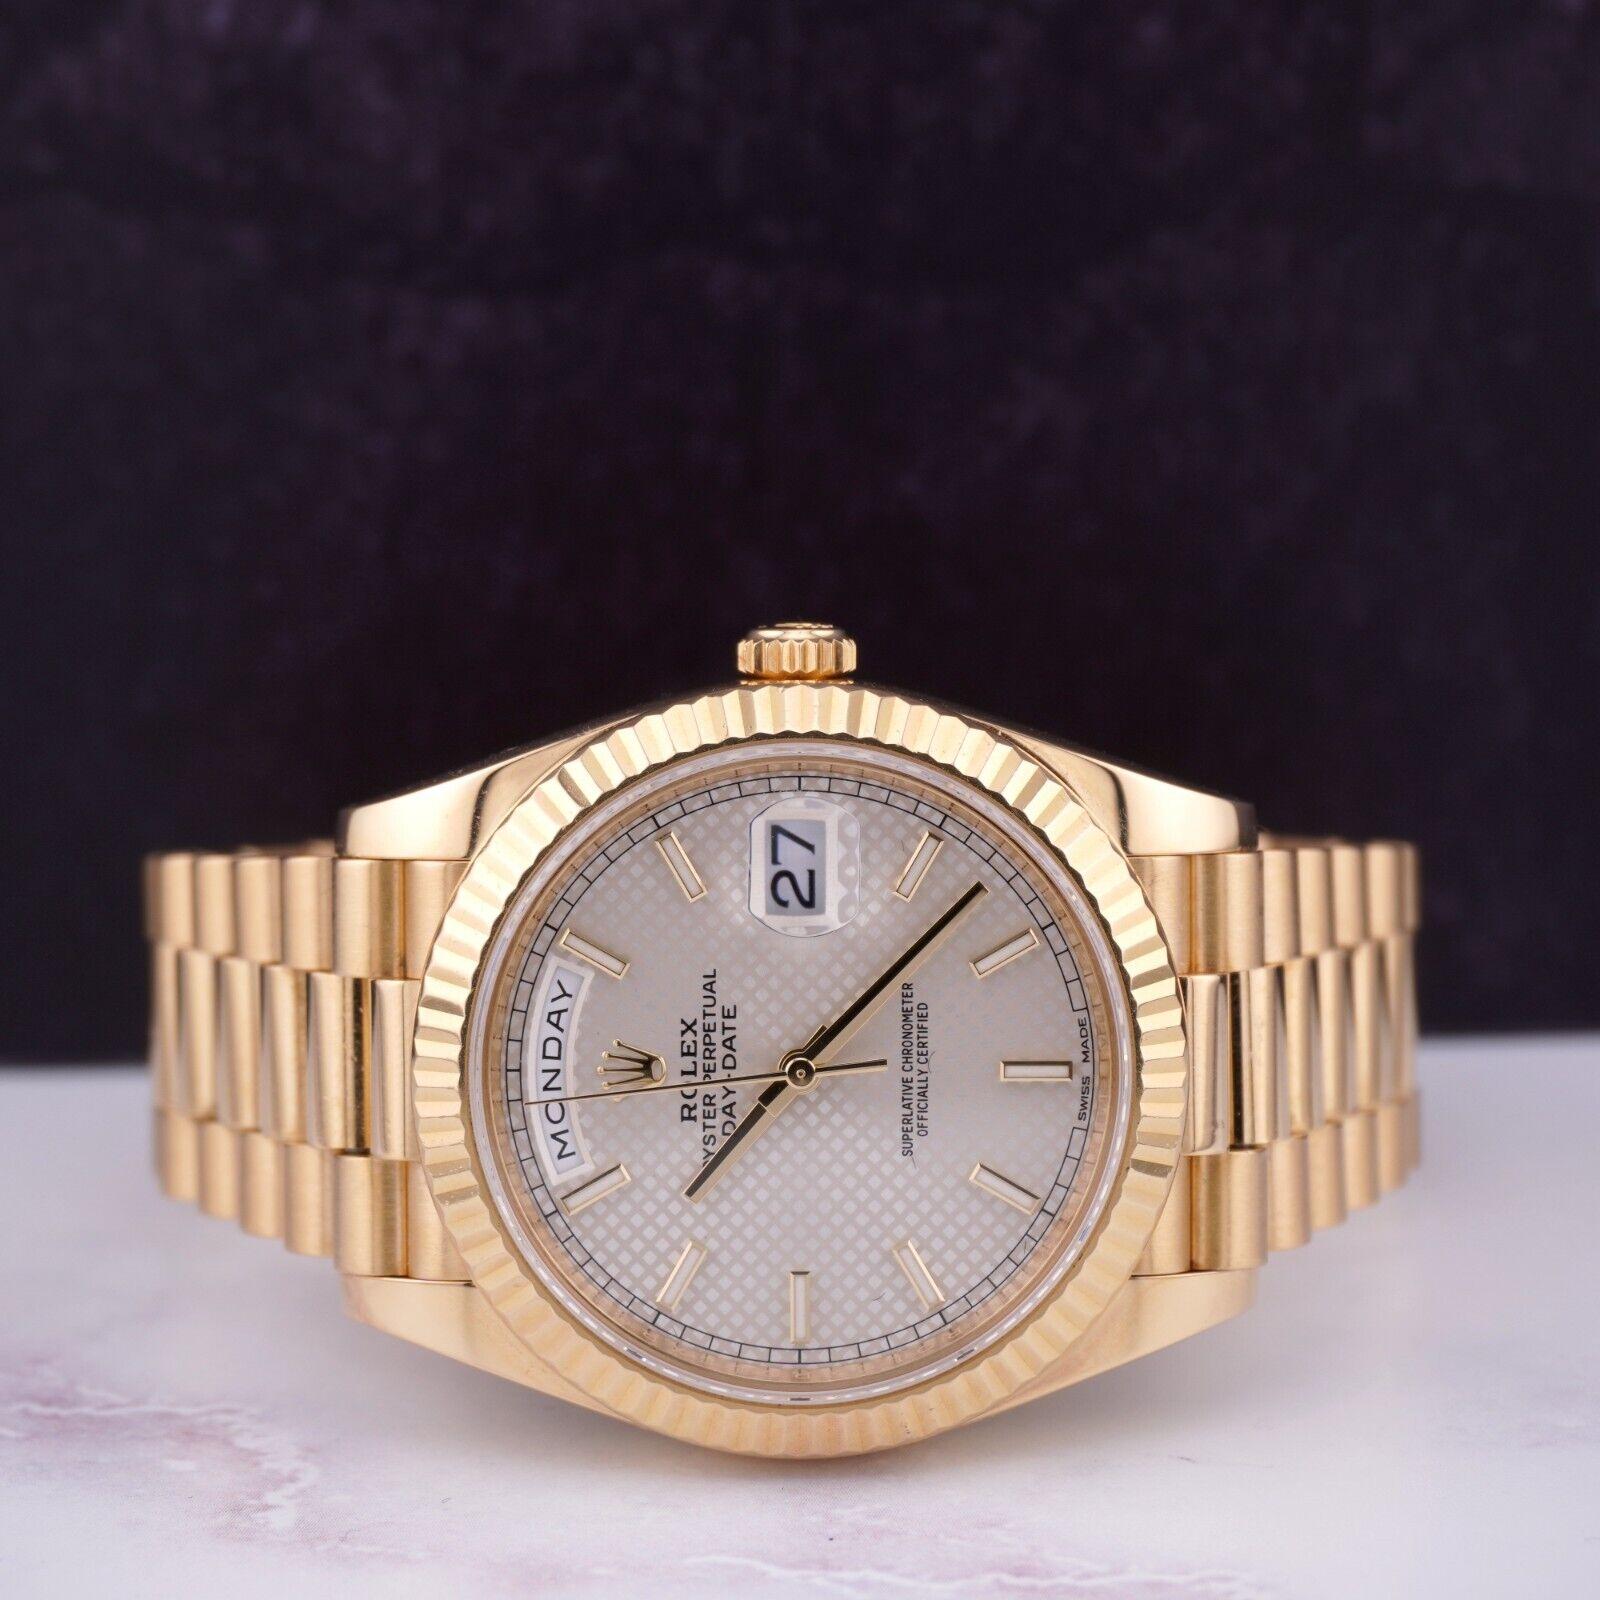 Rolex Day-Date 40mm Watch

Pre-owned w/ Original Box & Card
100% Authentic Authenticity Card
Condition - (Excellent Condition) - See Pics
Watch Reference - 228238
Model - Day-Date
Dial Color - Silver
Material - 18k Yellow Gold
Watch Will Fit Wrist